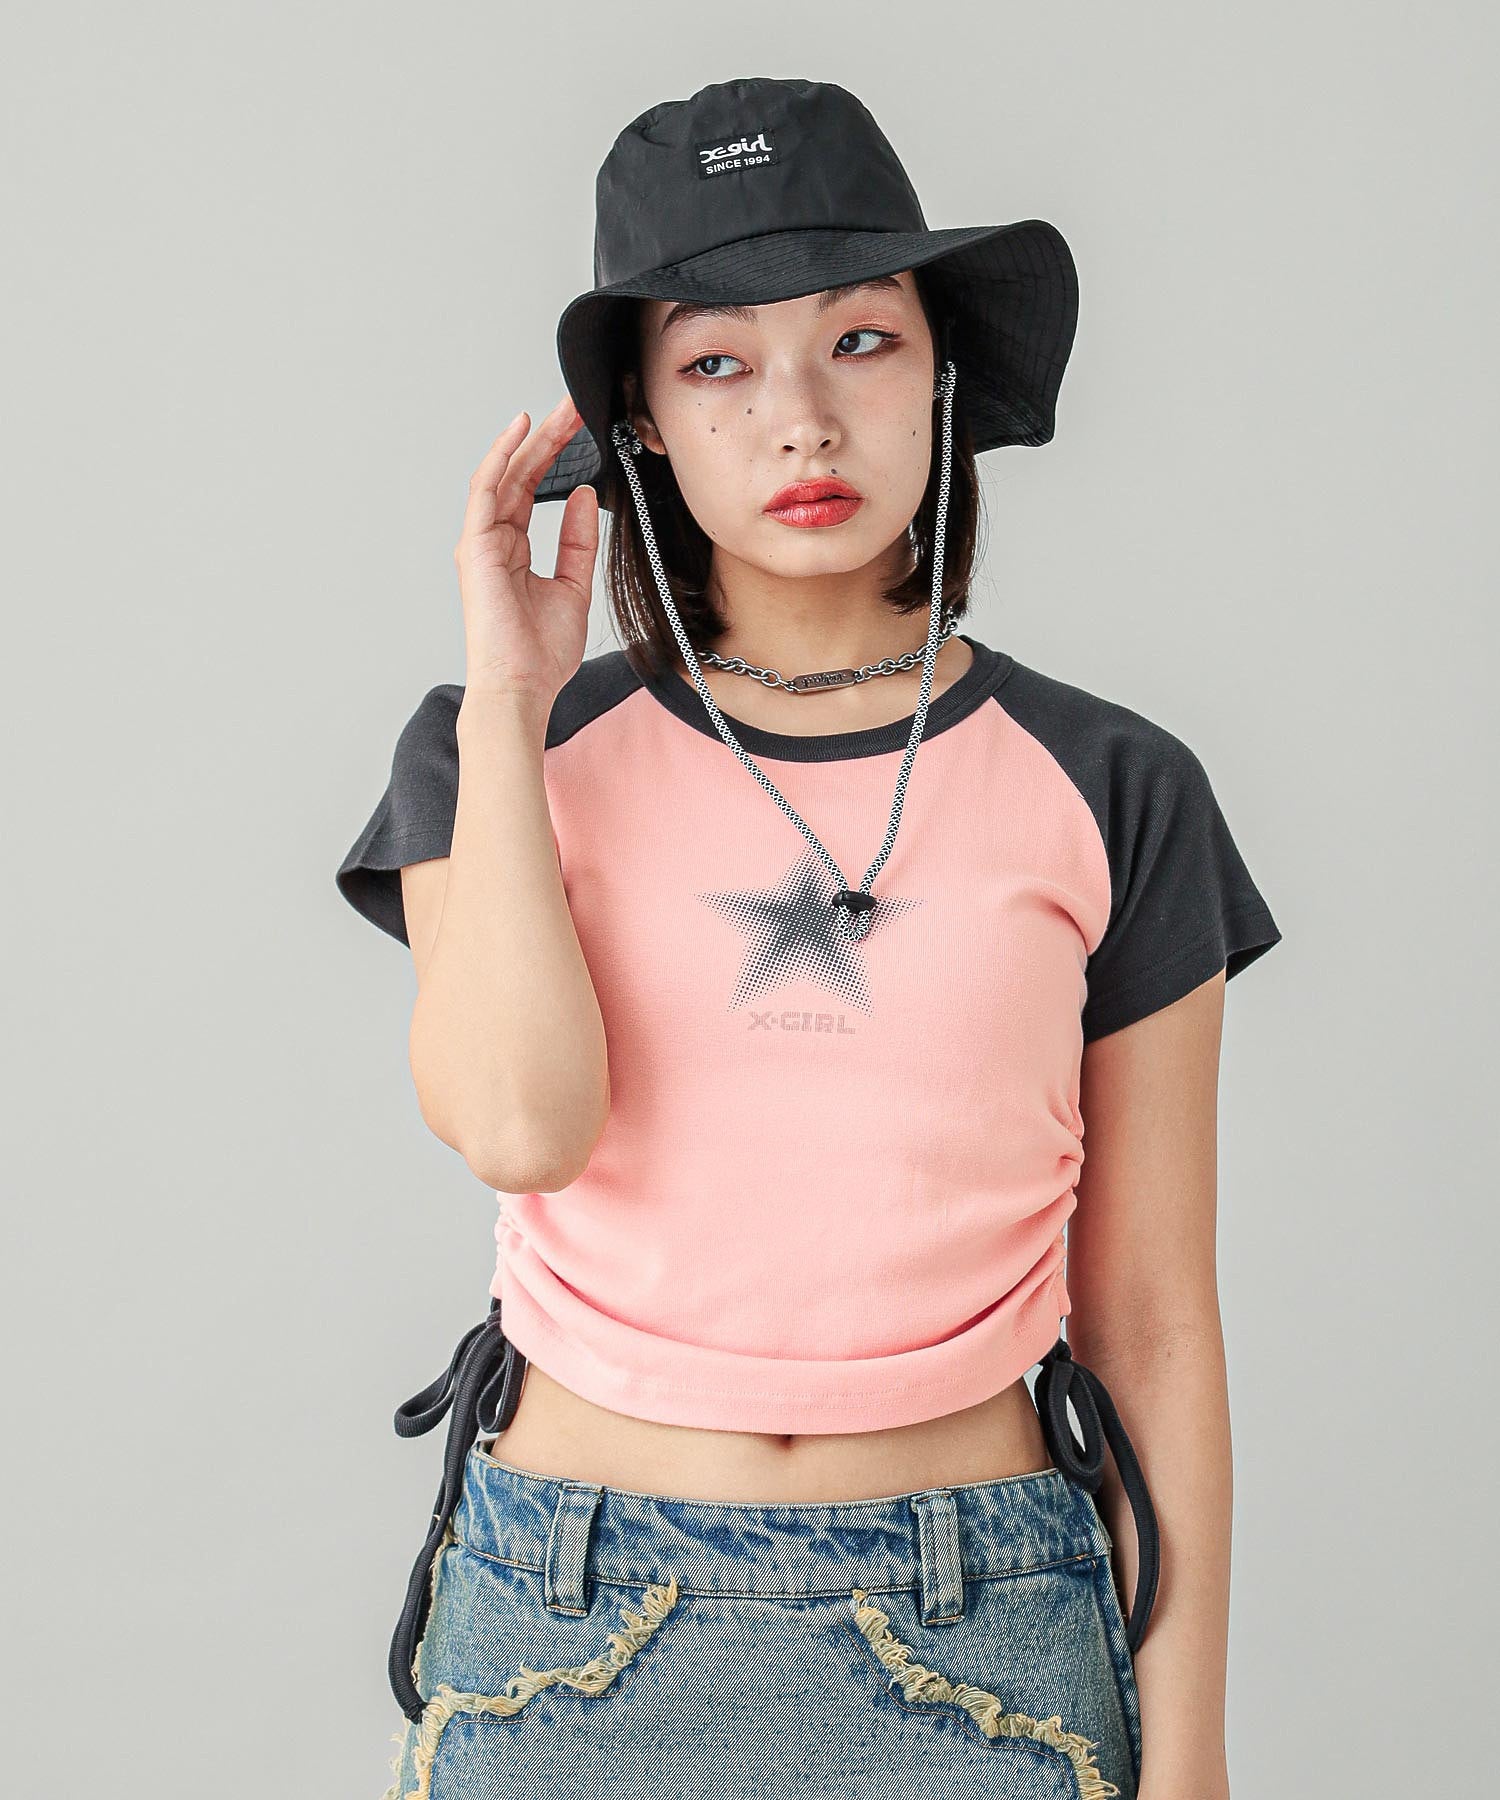 DOTTED STAR S/S RAGRAN BABY TOP